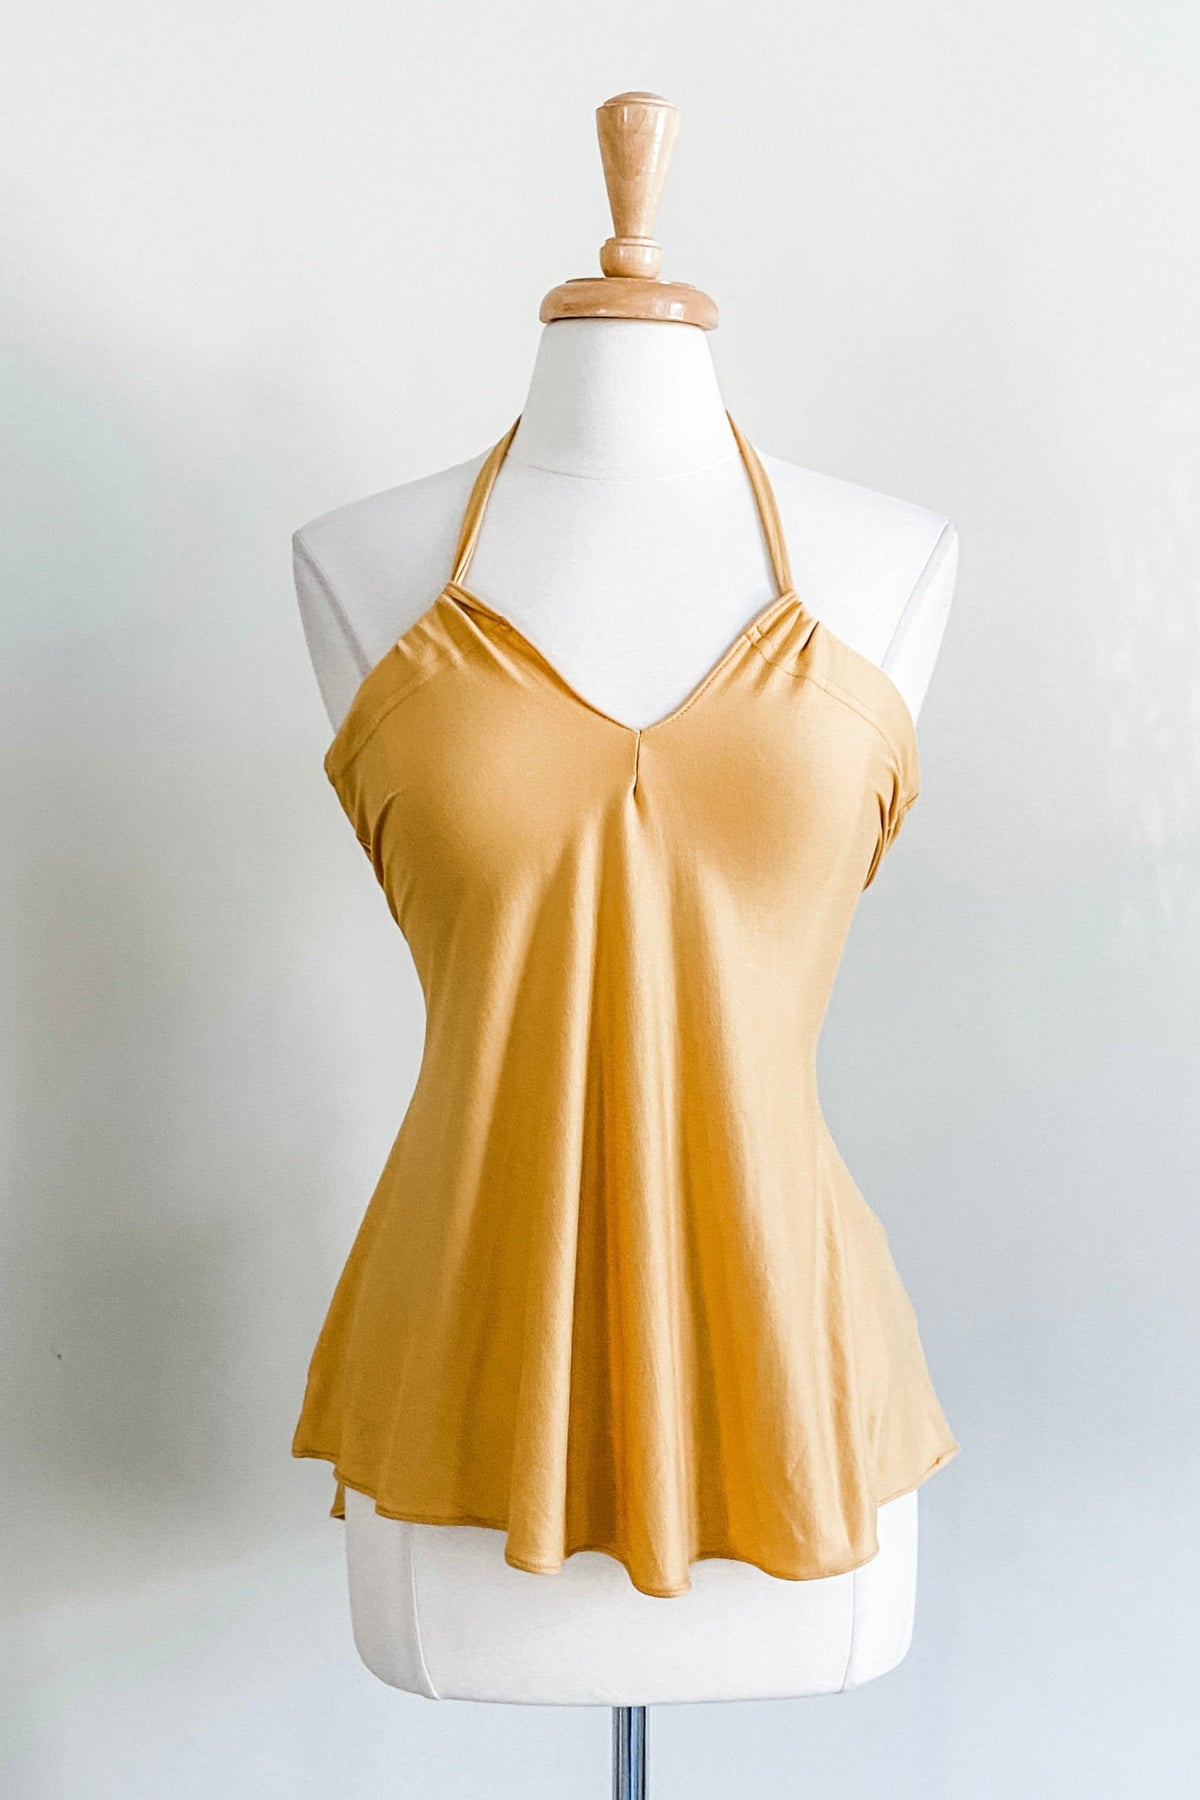 Diane Kroe Evermore Top (Yellow) - The Classic Capsule Collection